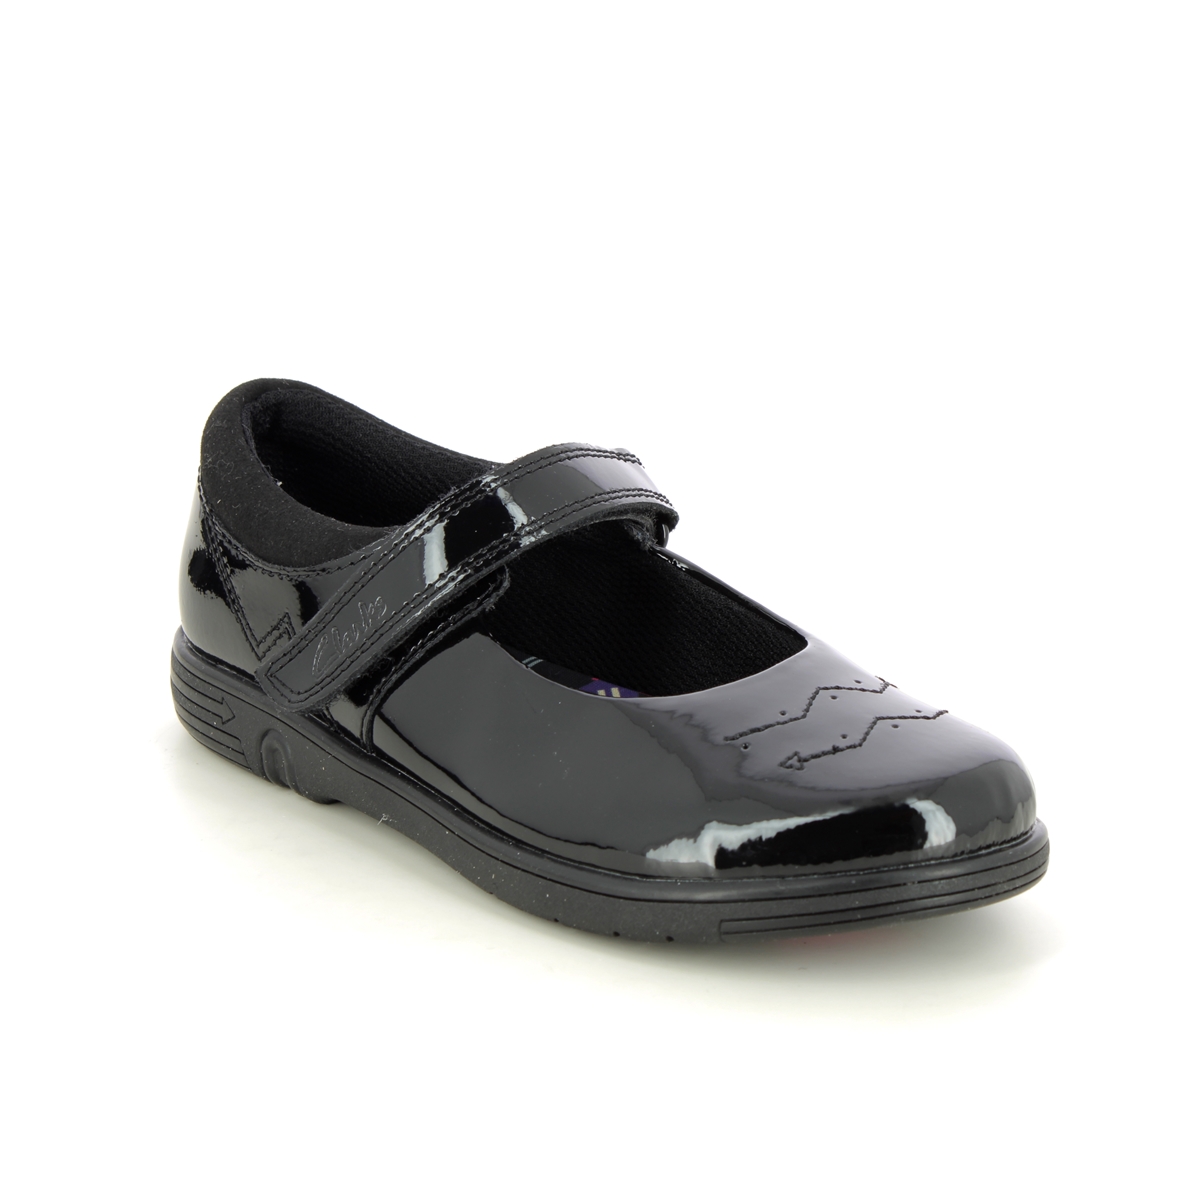 Clarks Jazzy Jig K Mary Jane Black Patent Kids Girls School Shoes 753086F In Size 13.5 In Plain Black Patent F Width Fitting Regular Fit For School Fo